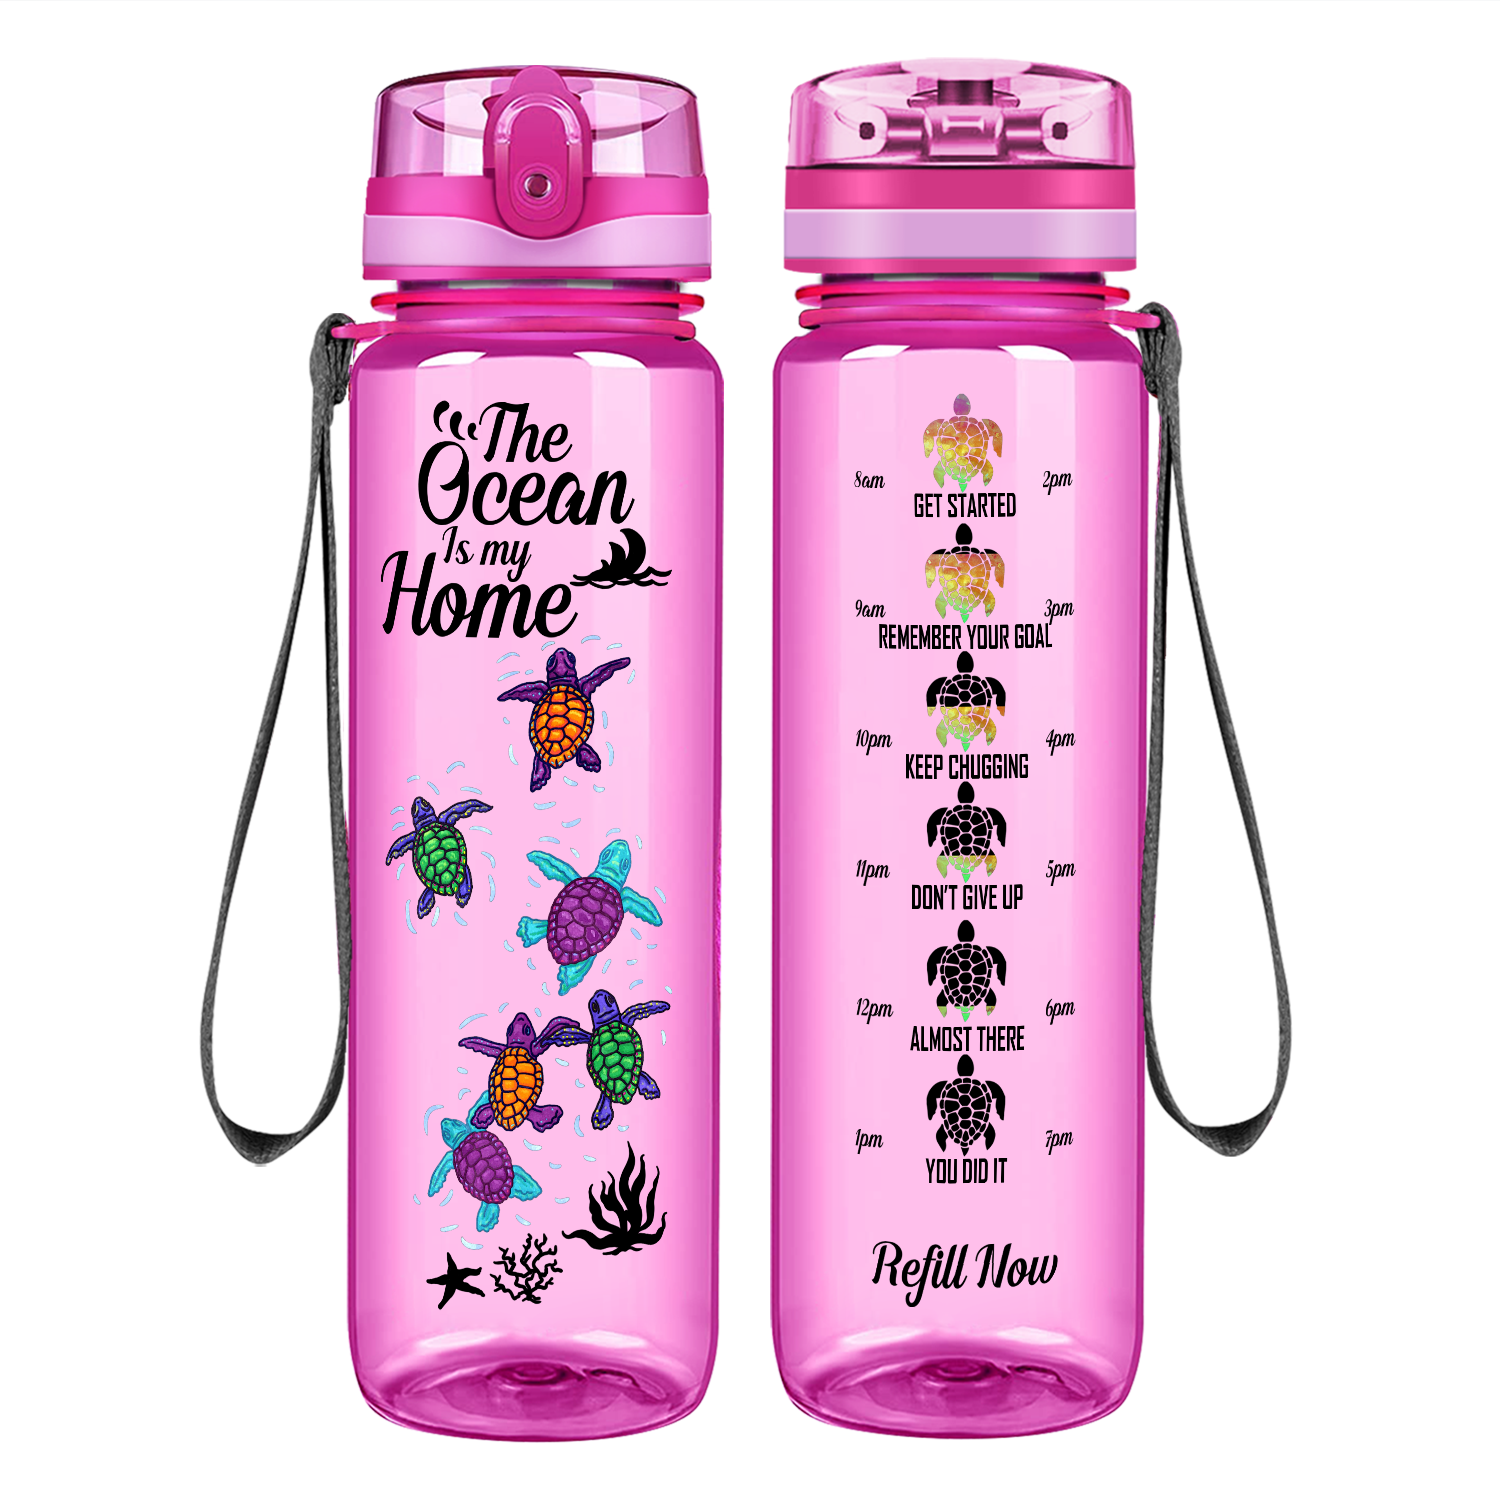 The Ocean Is My Home Turtles on 32 oz Motivational Tracking Water Bottle